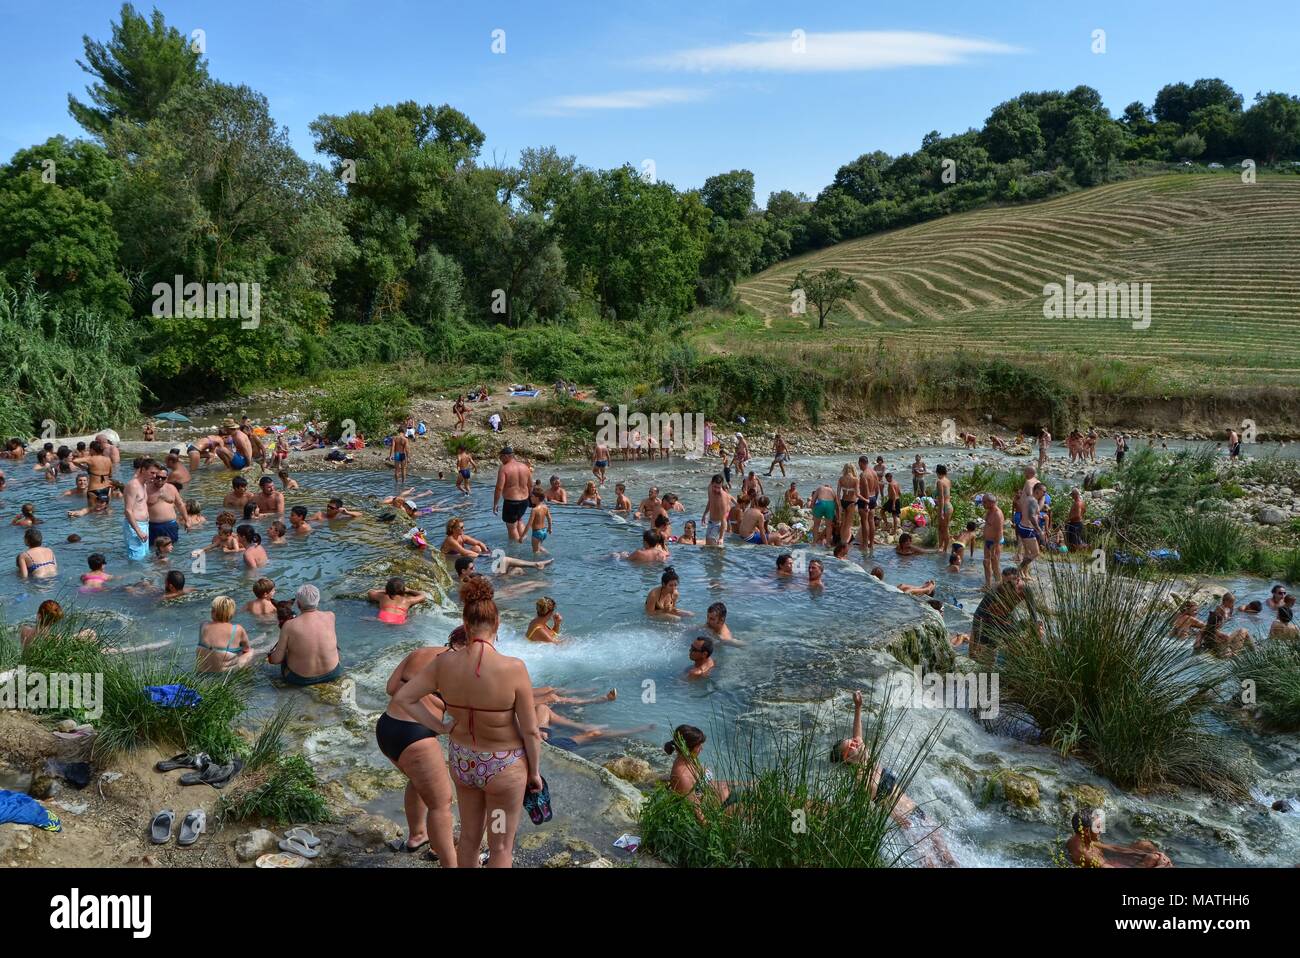 Terme di Saturnia, Tuscany, Italy 19 August 2014, 3.30 pm. Panoramic view  of the thermal baths, full of tourists swimming in the precious thermal  wate Stock Photo - Alamy